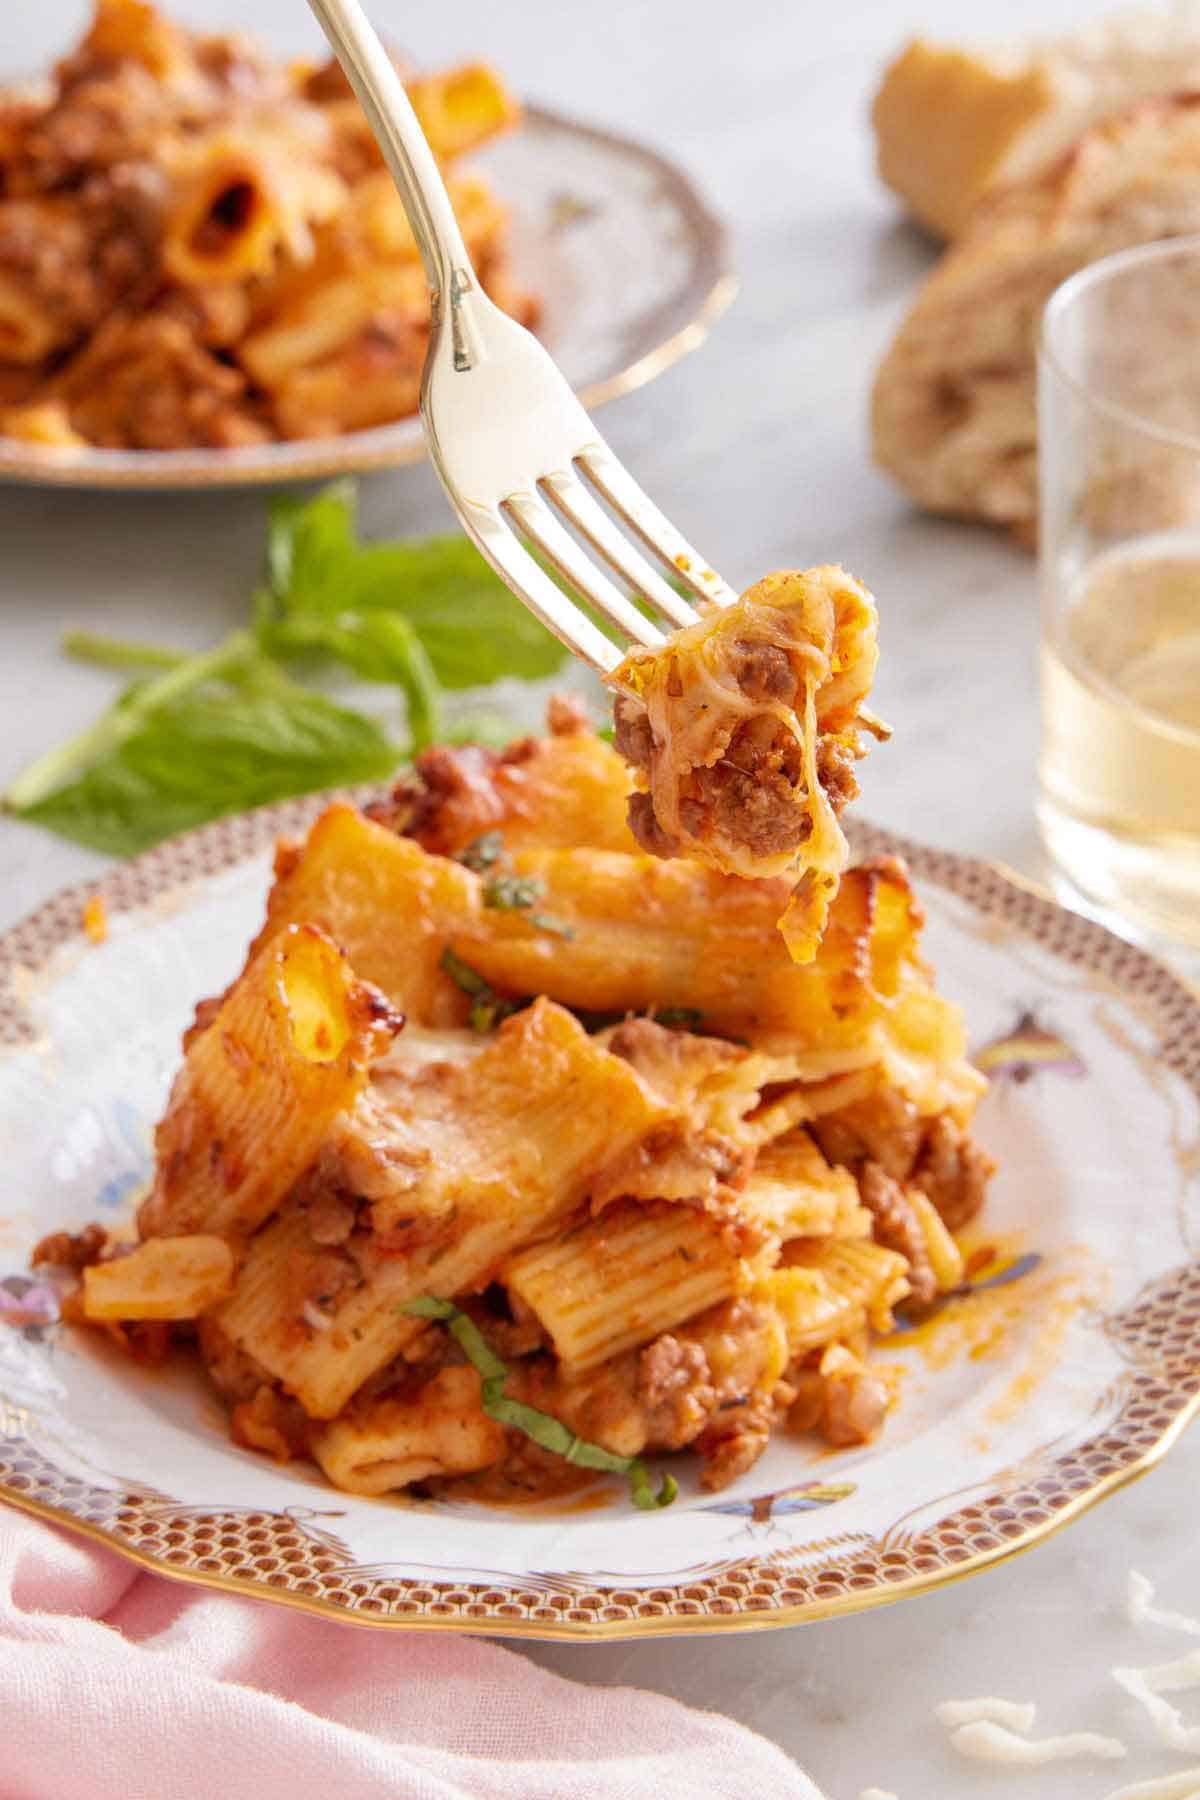 A fork lifting up a bite of baked rigatoni from a plate. A second plate, basil, wine, and bread in the background.